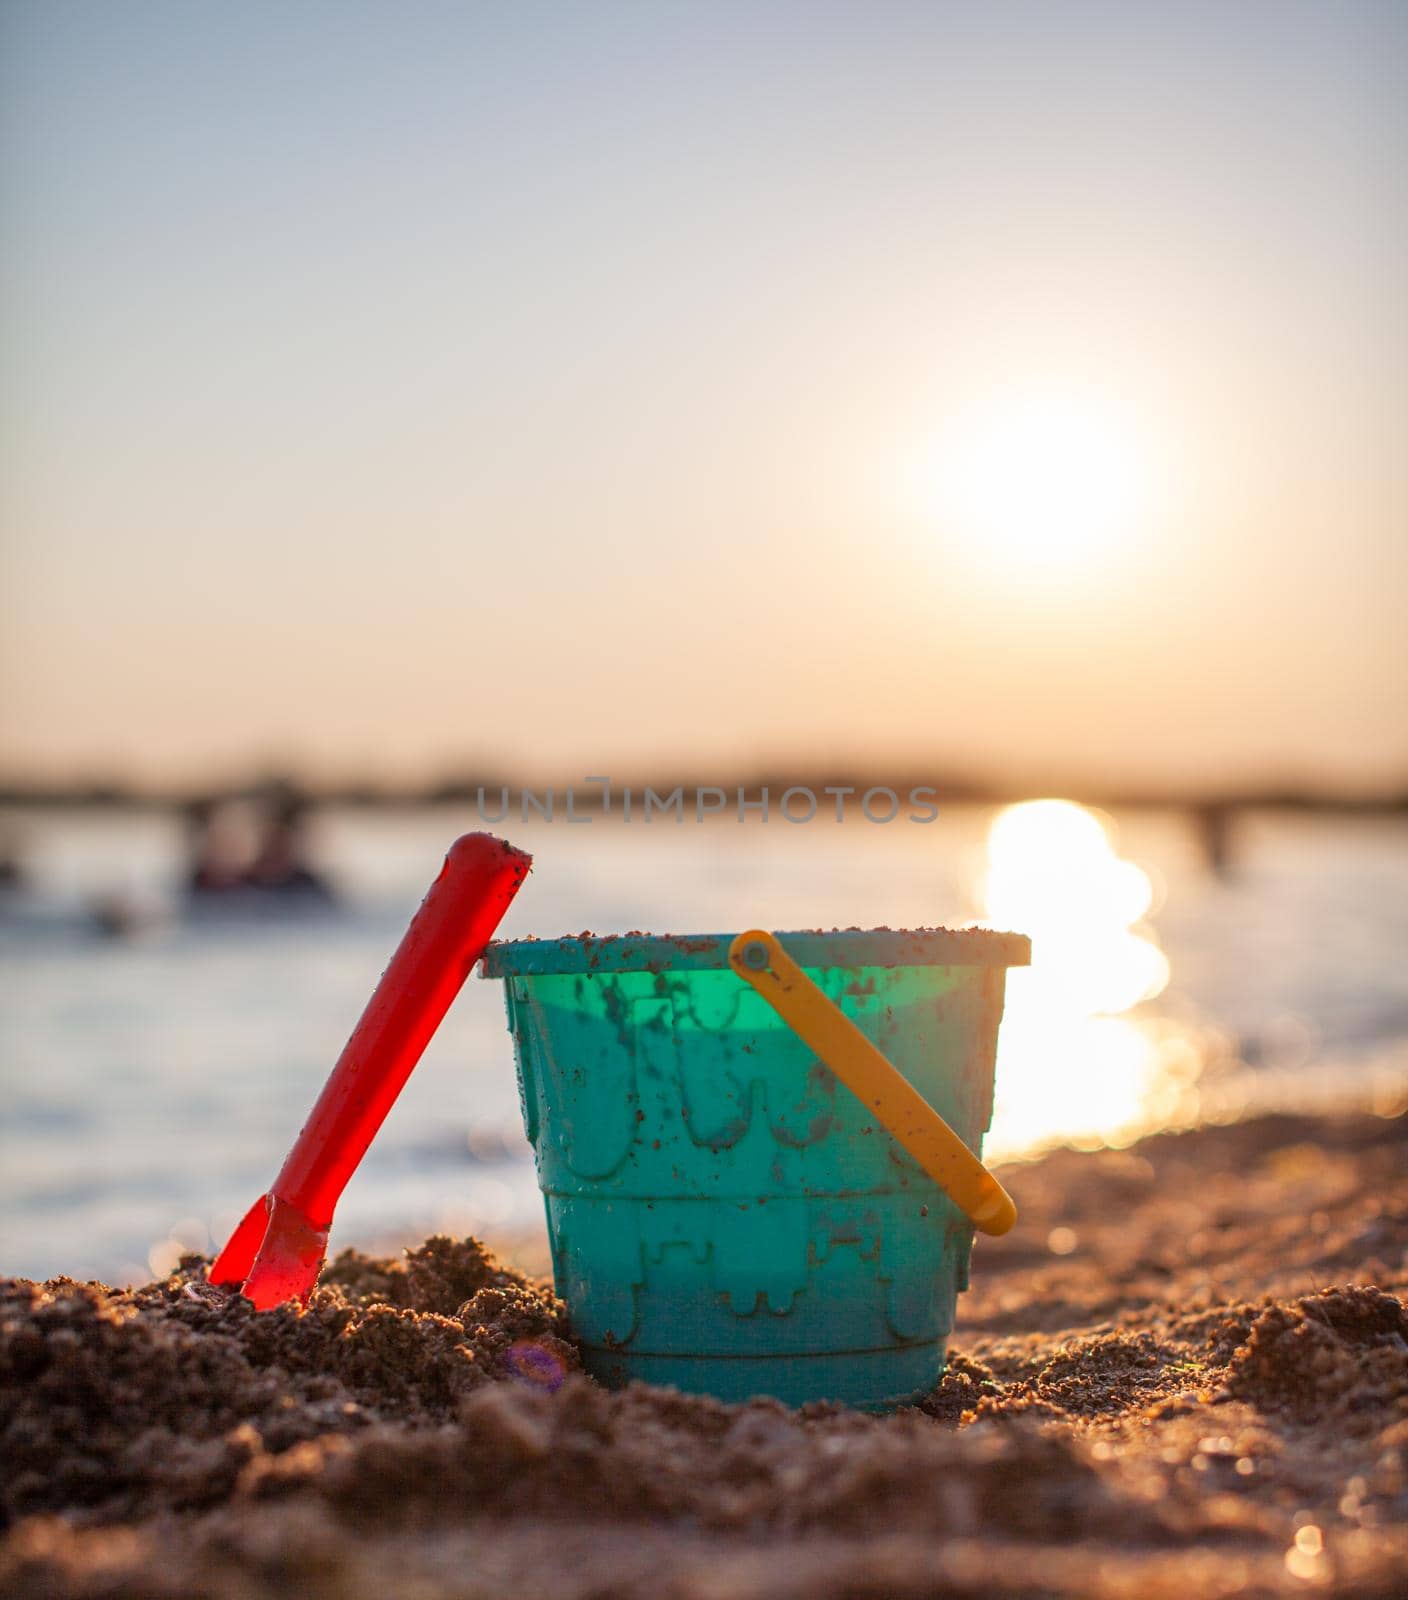 Children's toys for playing on the sand. Plastic bucket and rake on the beach at sunset. The concept of summer, family holidays and vacations.